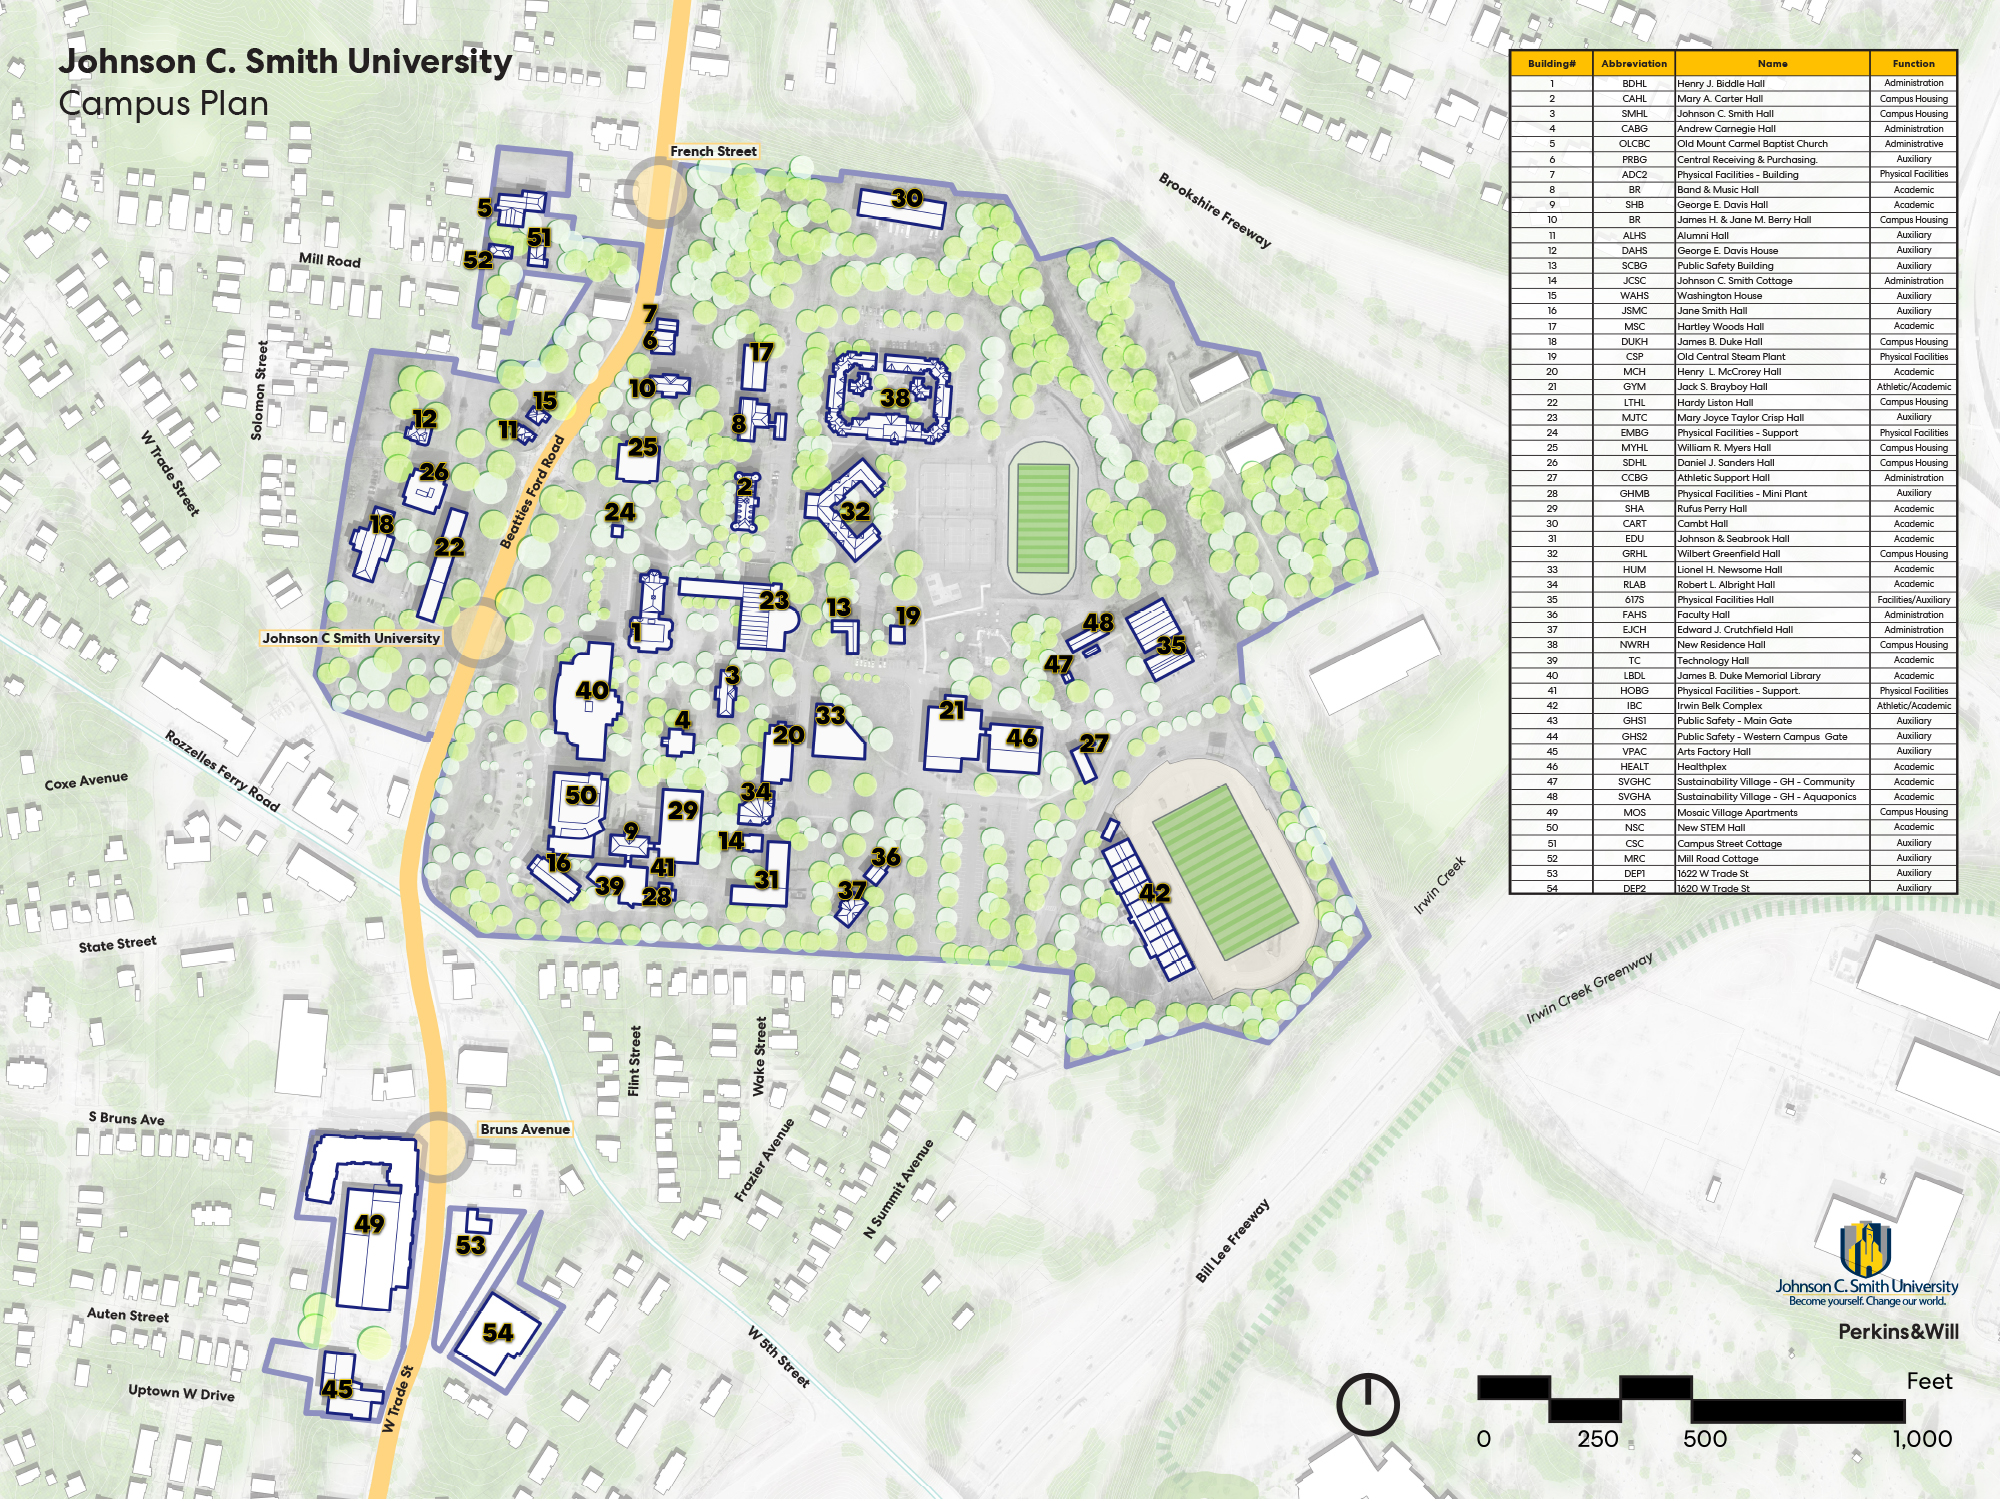 Map of campus focusing on specific buildings